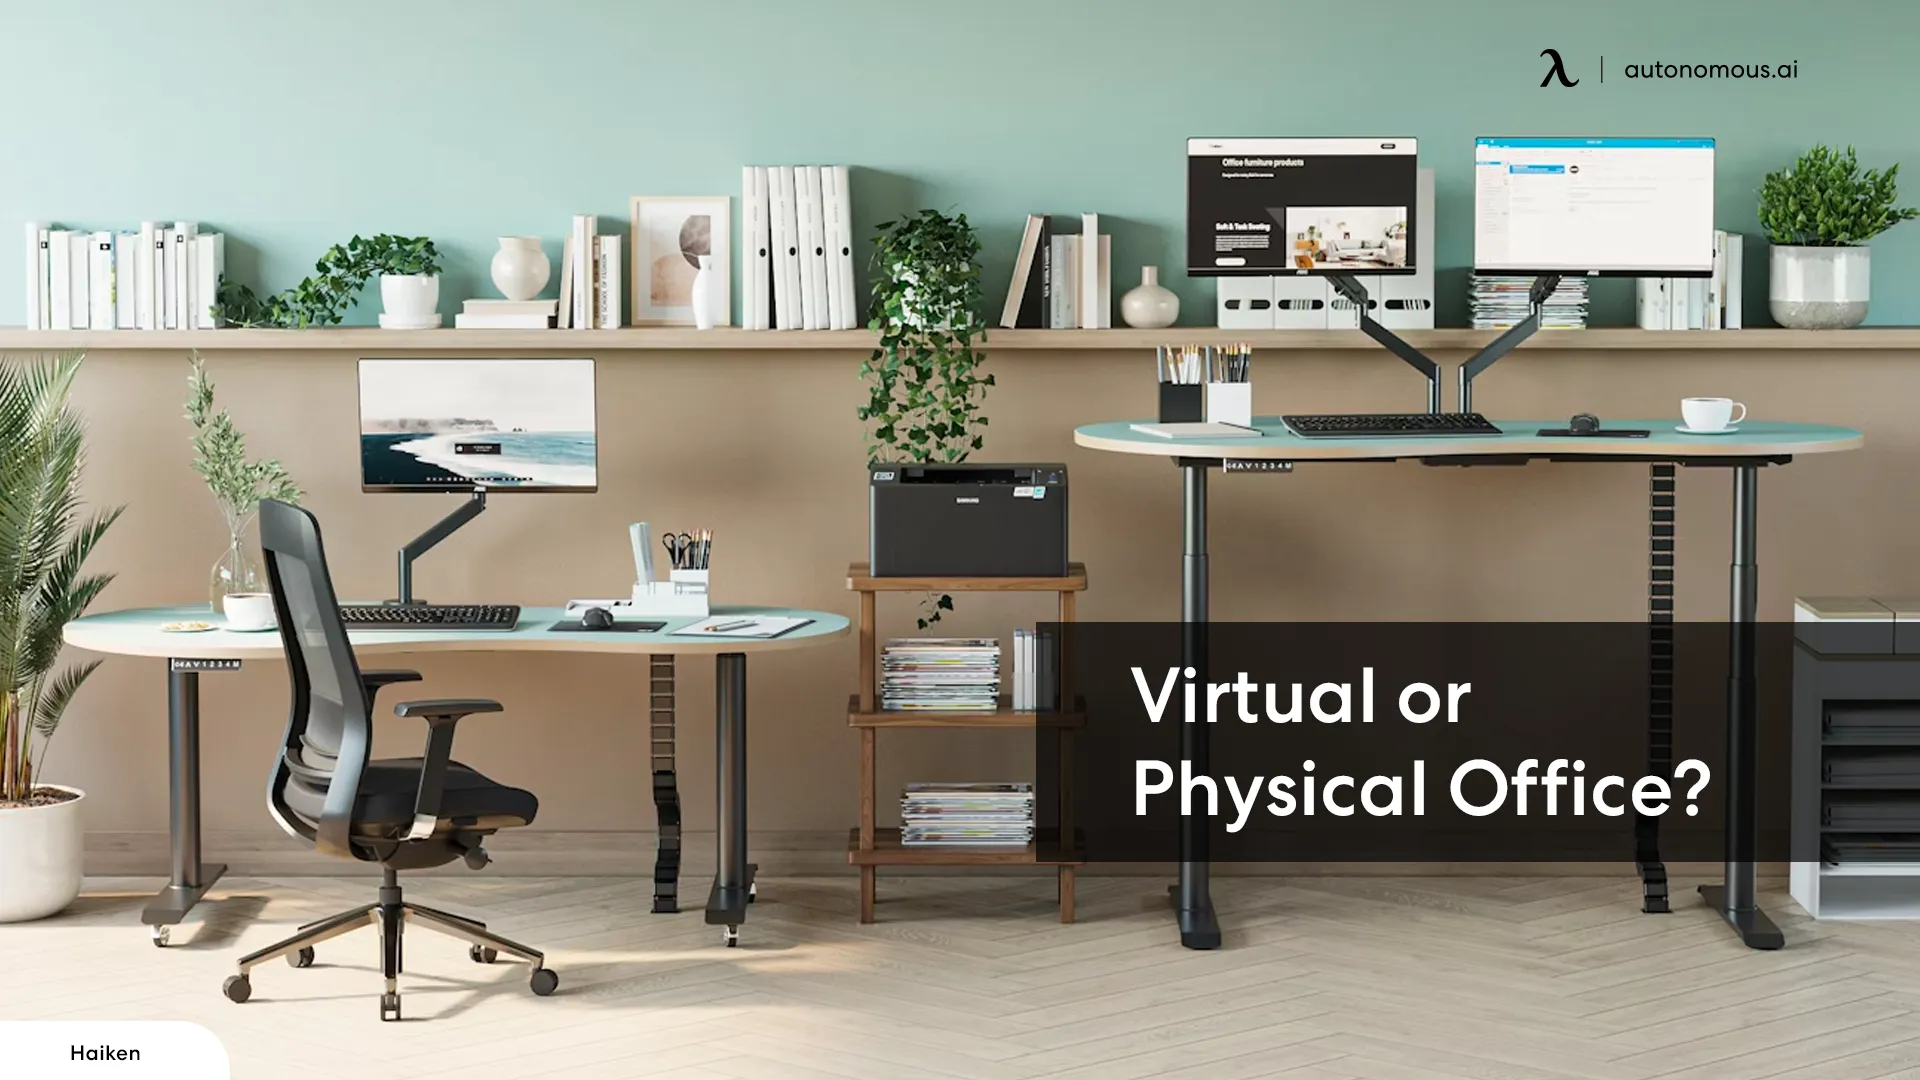 Virtual or Physical Office? Deciding What's Best for Your Business